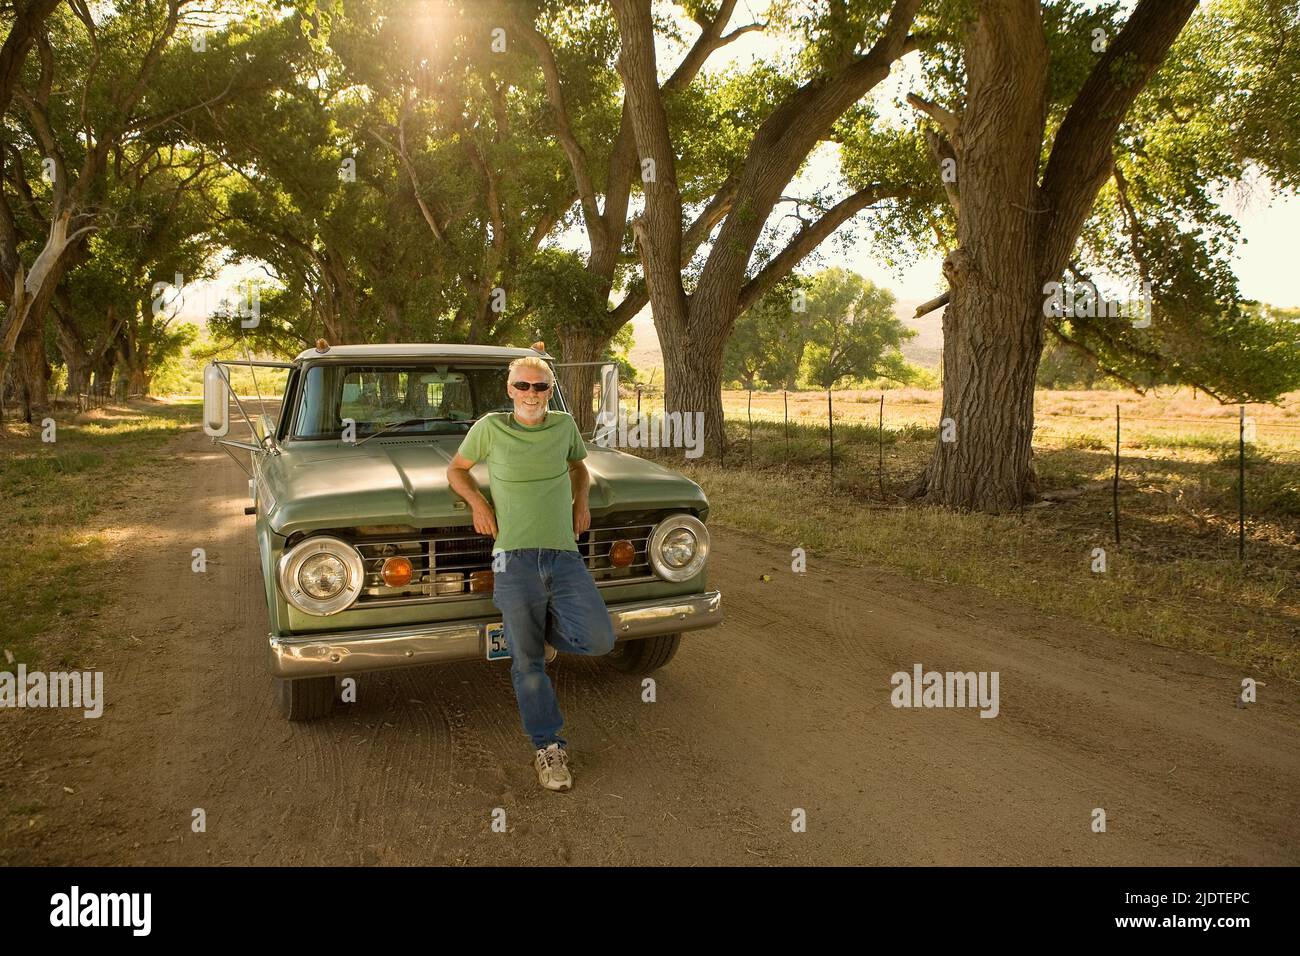 Blonde man ( aged 40-60) with beard leaning on a vintage pick up truck parked in a rural area with cottonwood trees(populus fremontii) and pasture Stock Photo